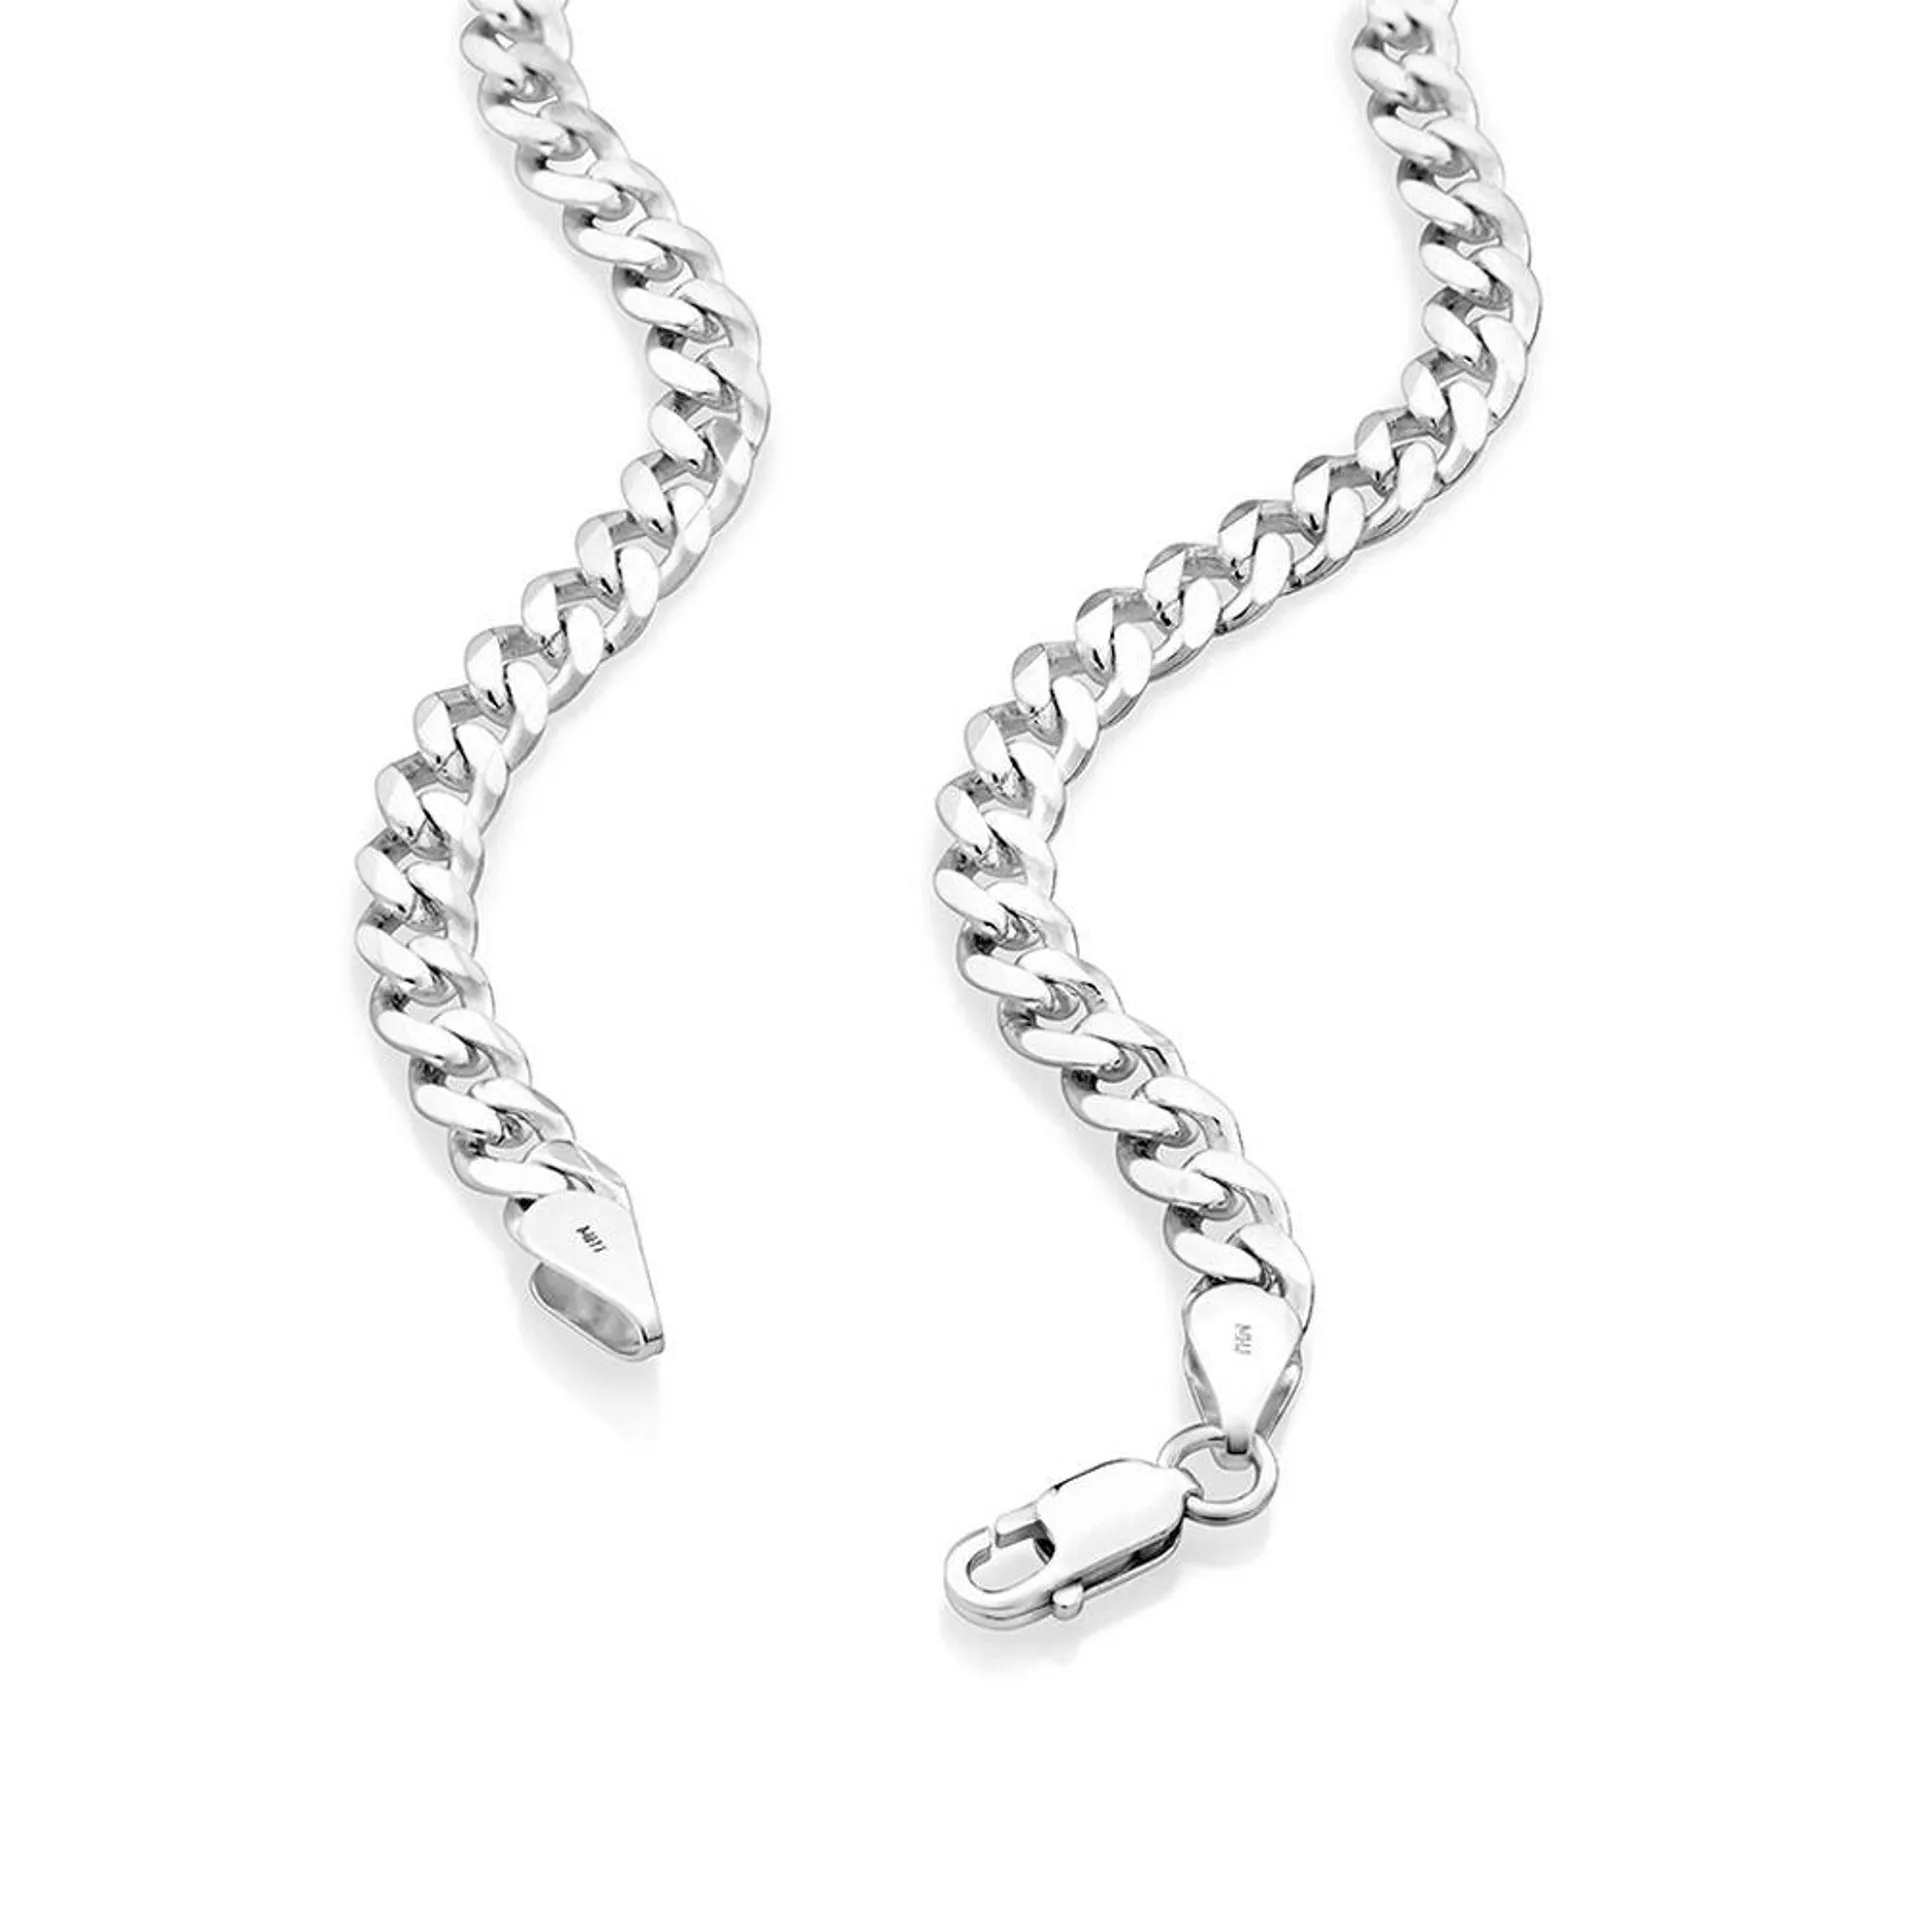 50cm (20") 5.5mm Width Curb Chain in Sterling Silver